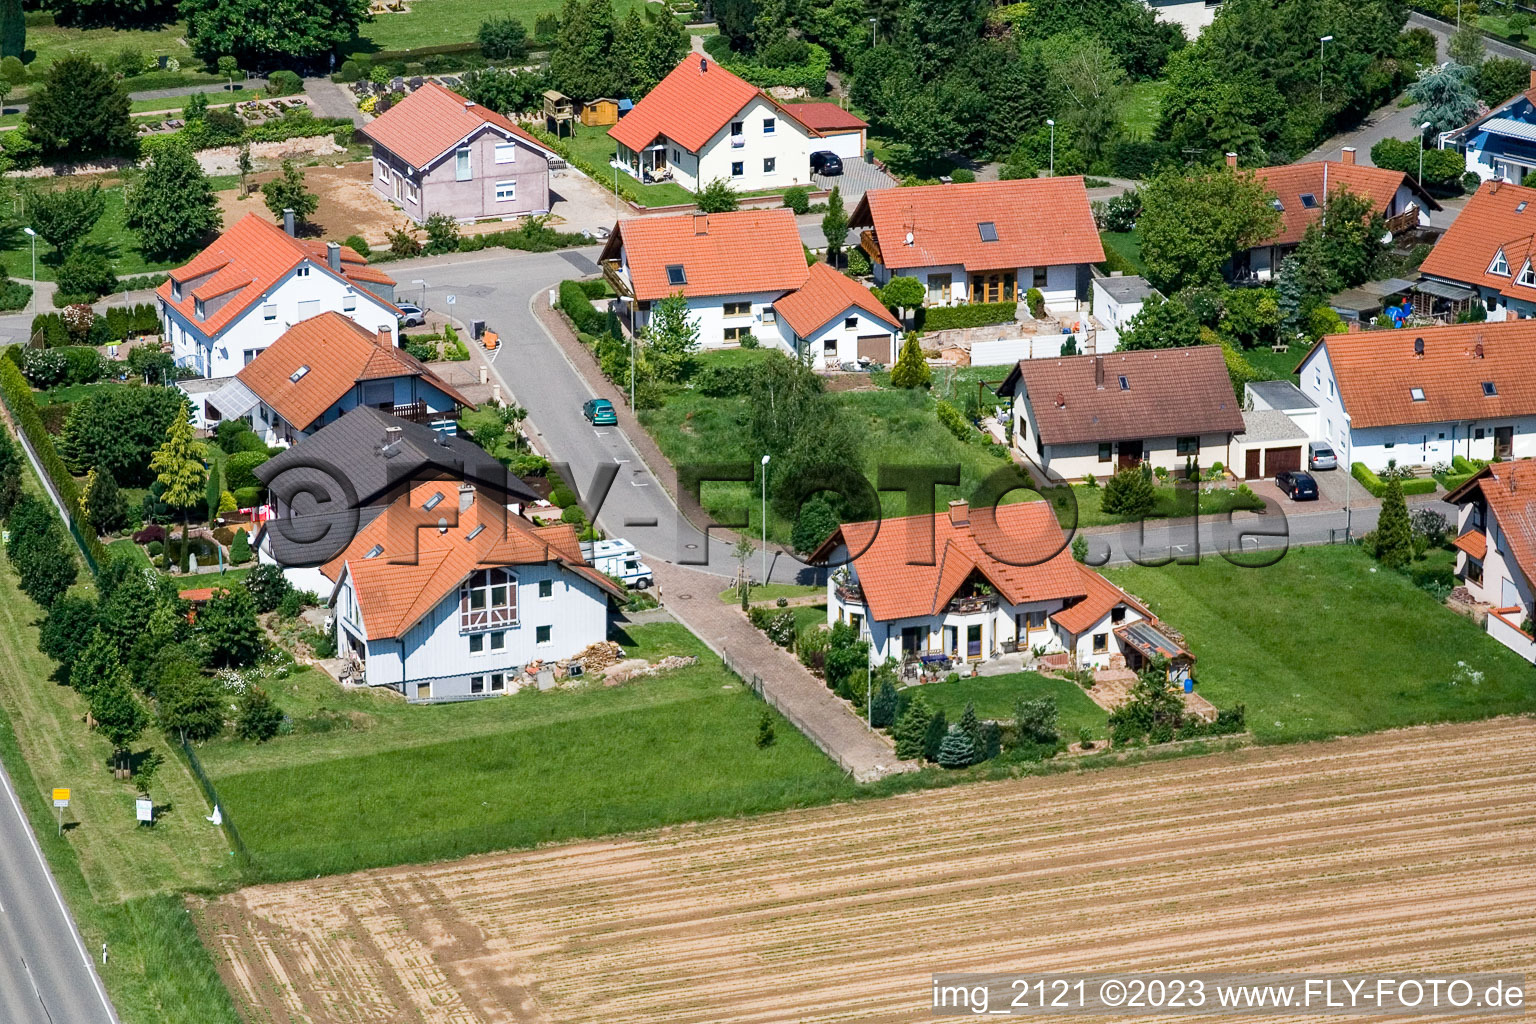 Aerial photograpy of Klingbachstr in Steinweiler in the state Rhineland-Palatinate, Germany